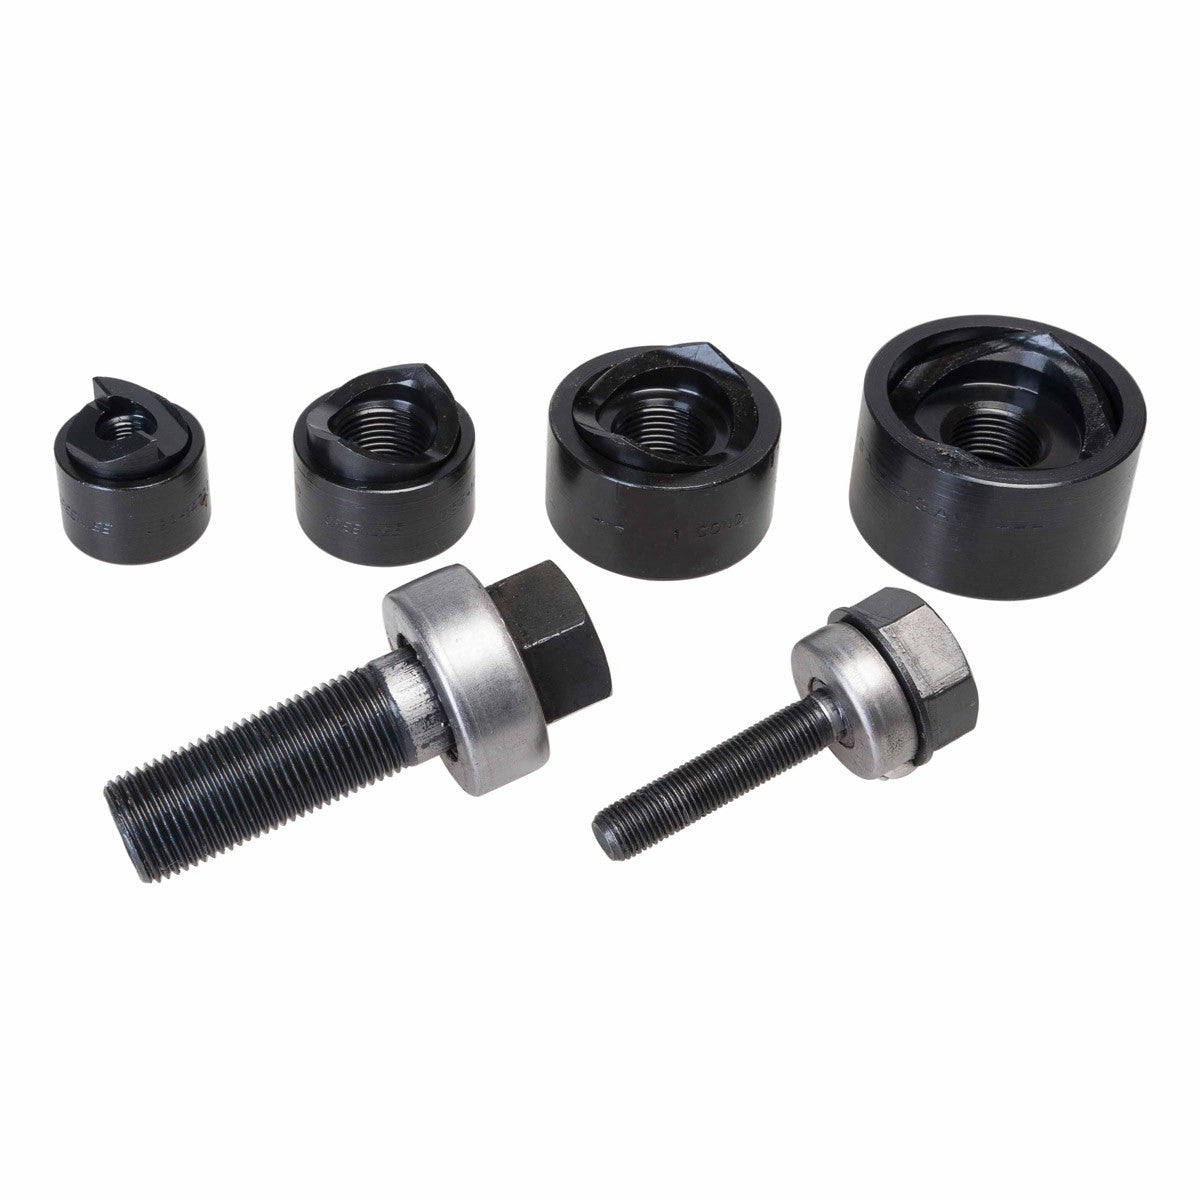 Greenlee 735BB Knockout Punch Kit, 1/2" to 1-1/4"